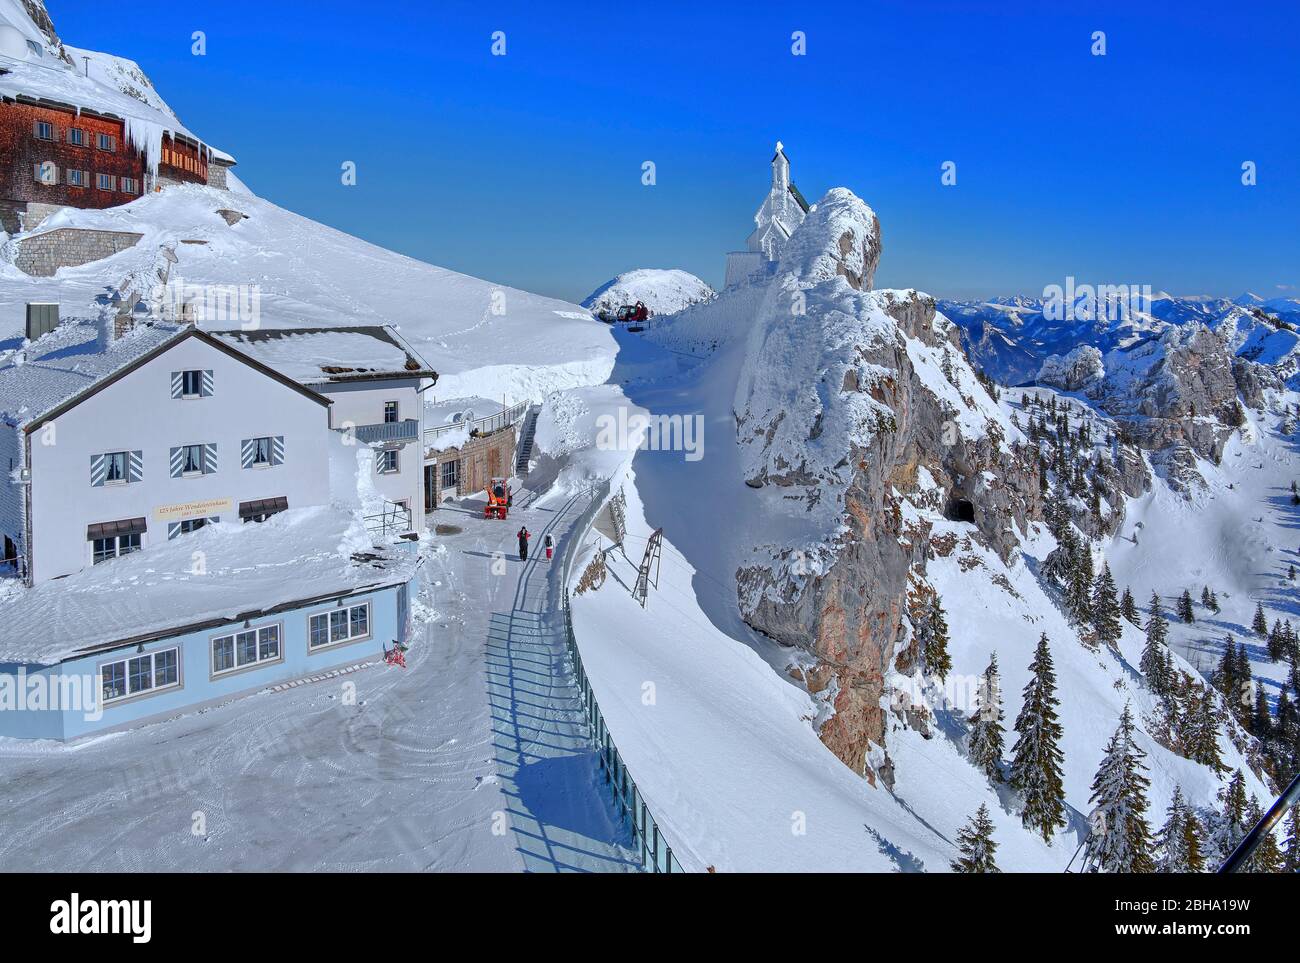 Viewing terrace with mountain house and chapel on the mount Wendelstein in winter, Leitzach valley, Bayrischzell, Mangfall mountains, Upper Bavaria, Bavaria, Germany Stock Photo